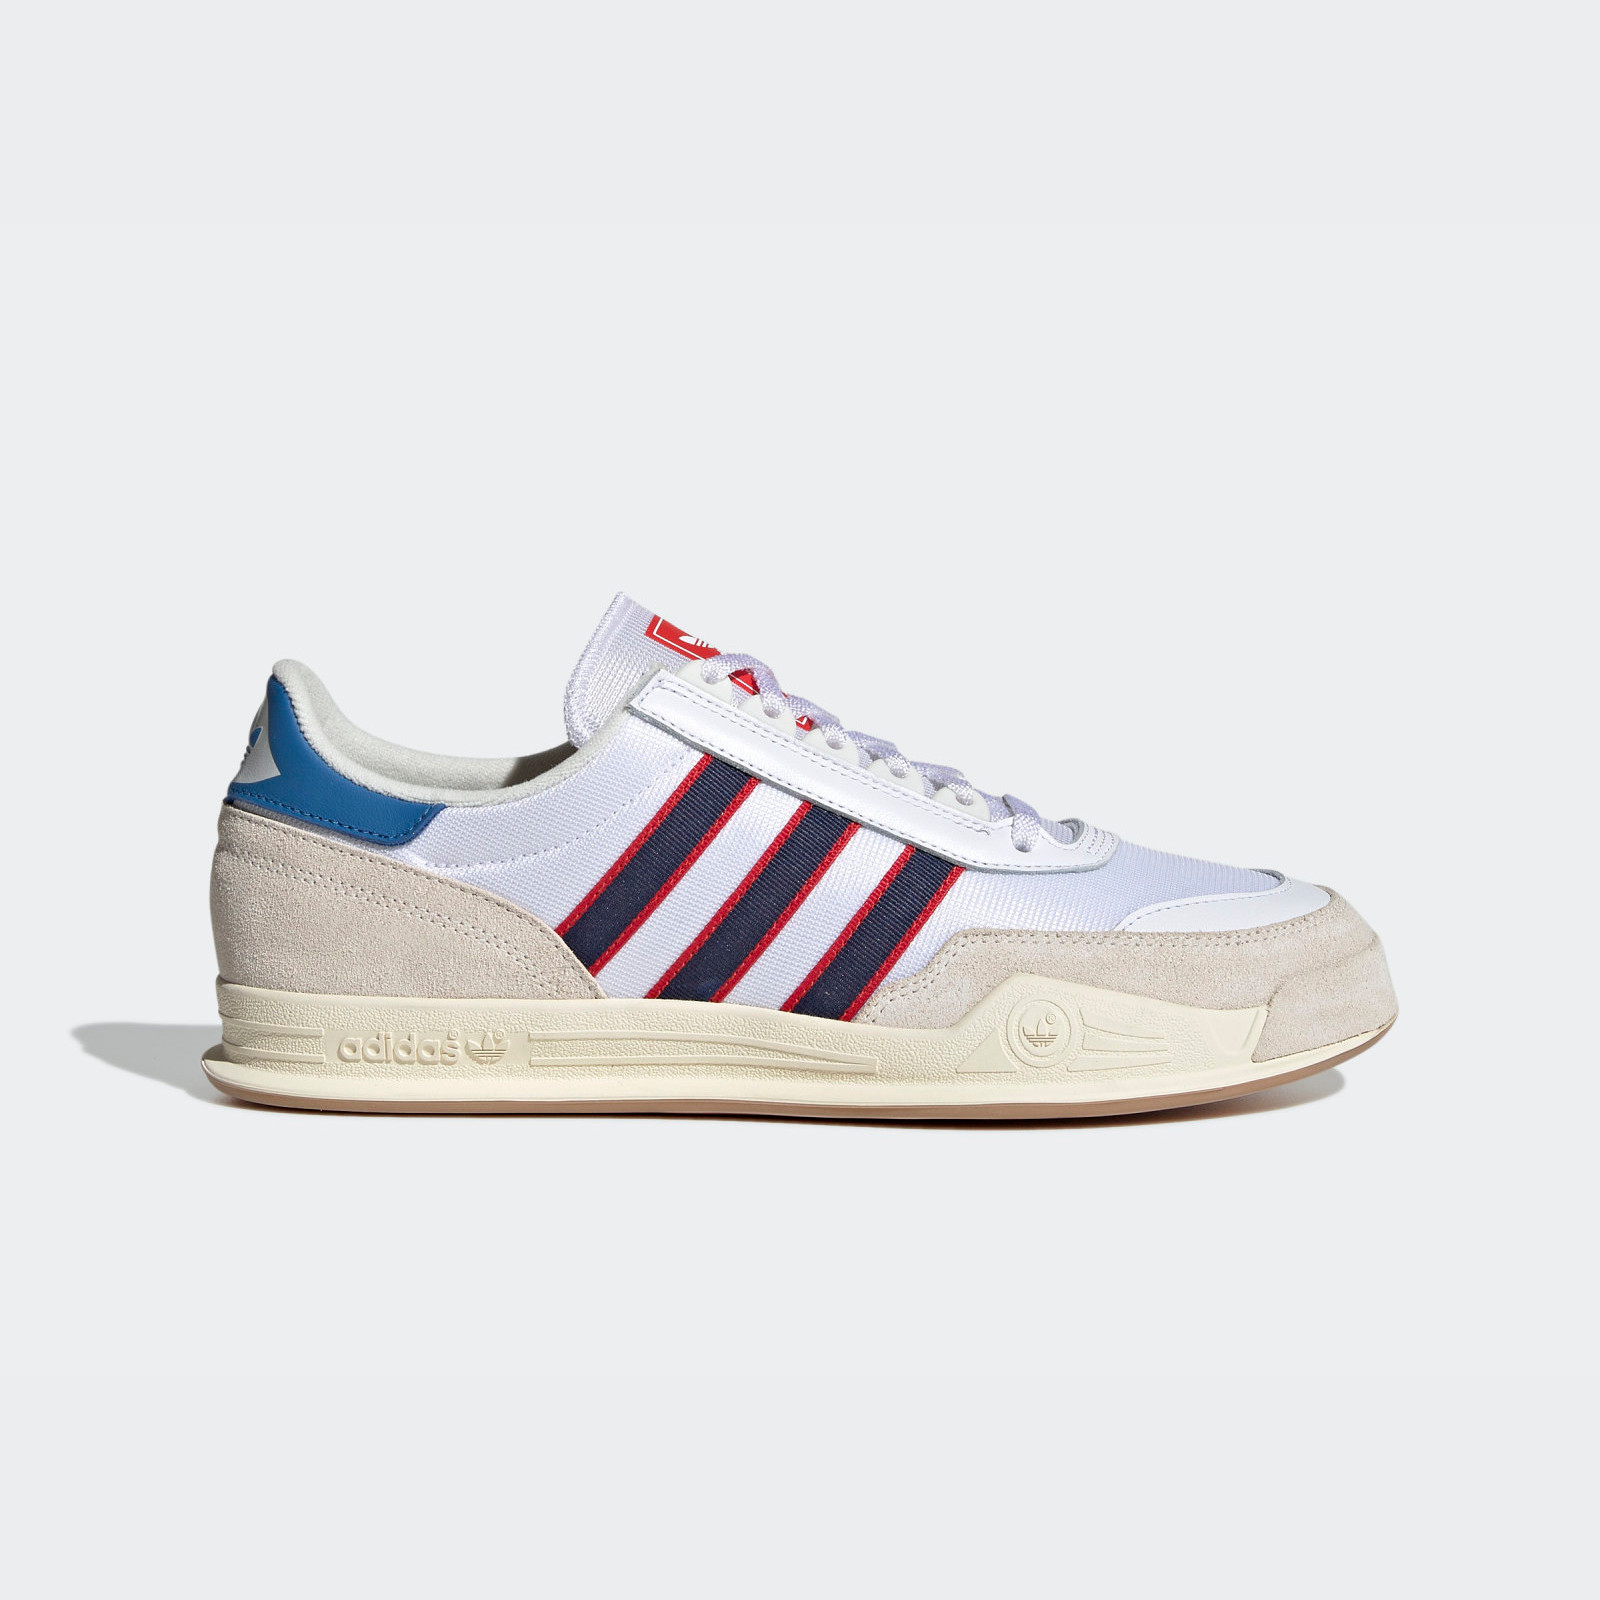 Adidas CT86
White / Blue / Red